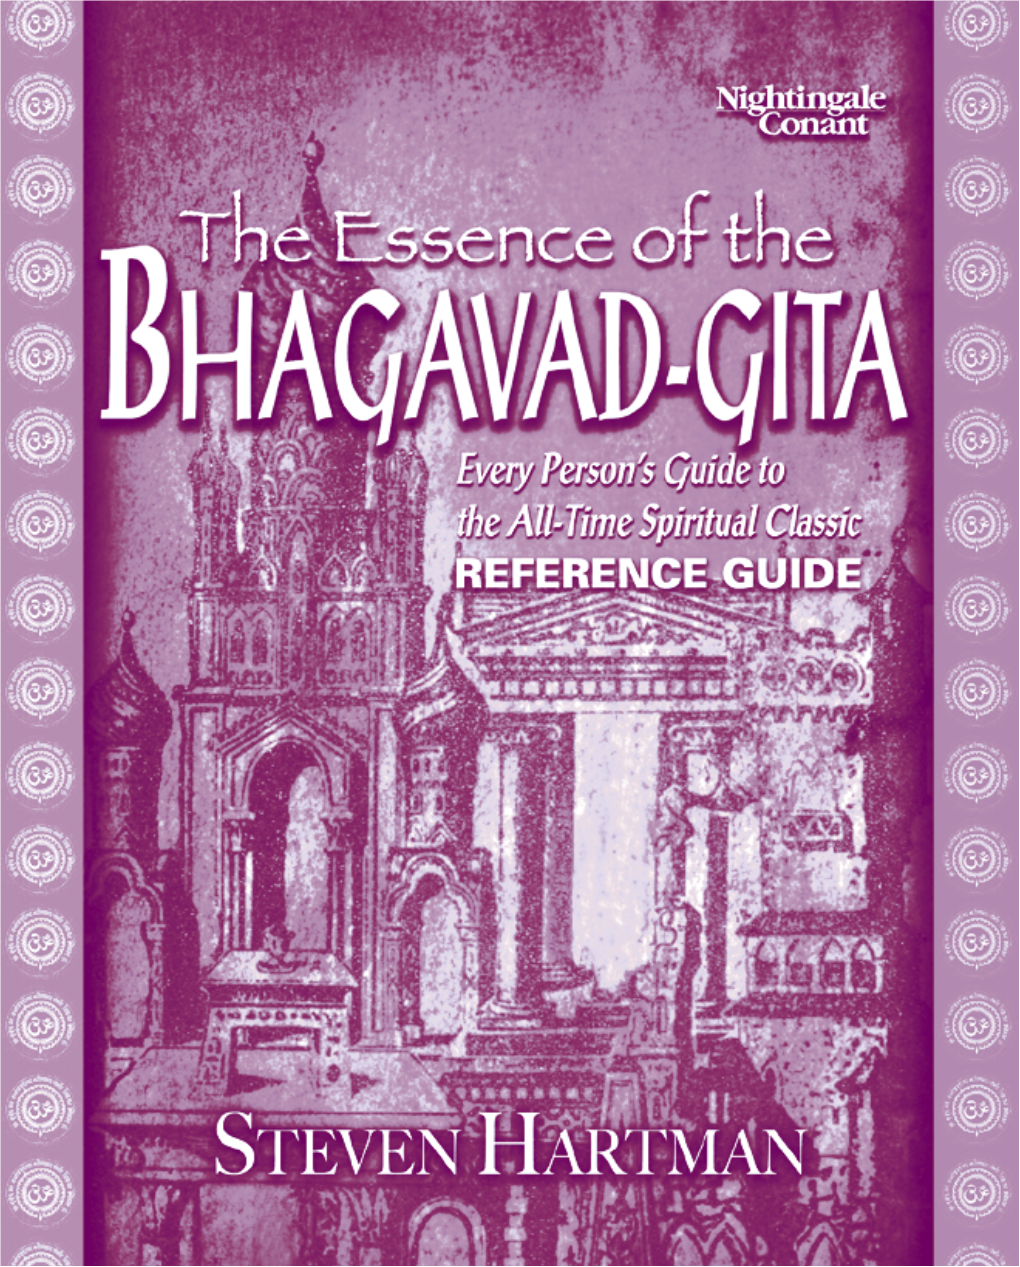 The Essence of the BHAGAVAD-GITA Every Person’S Guide to the All-Time Spiritual Classic